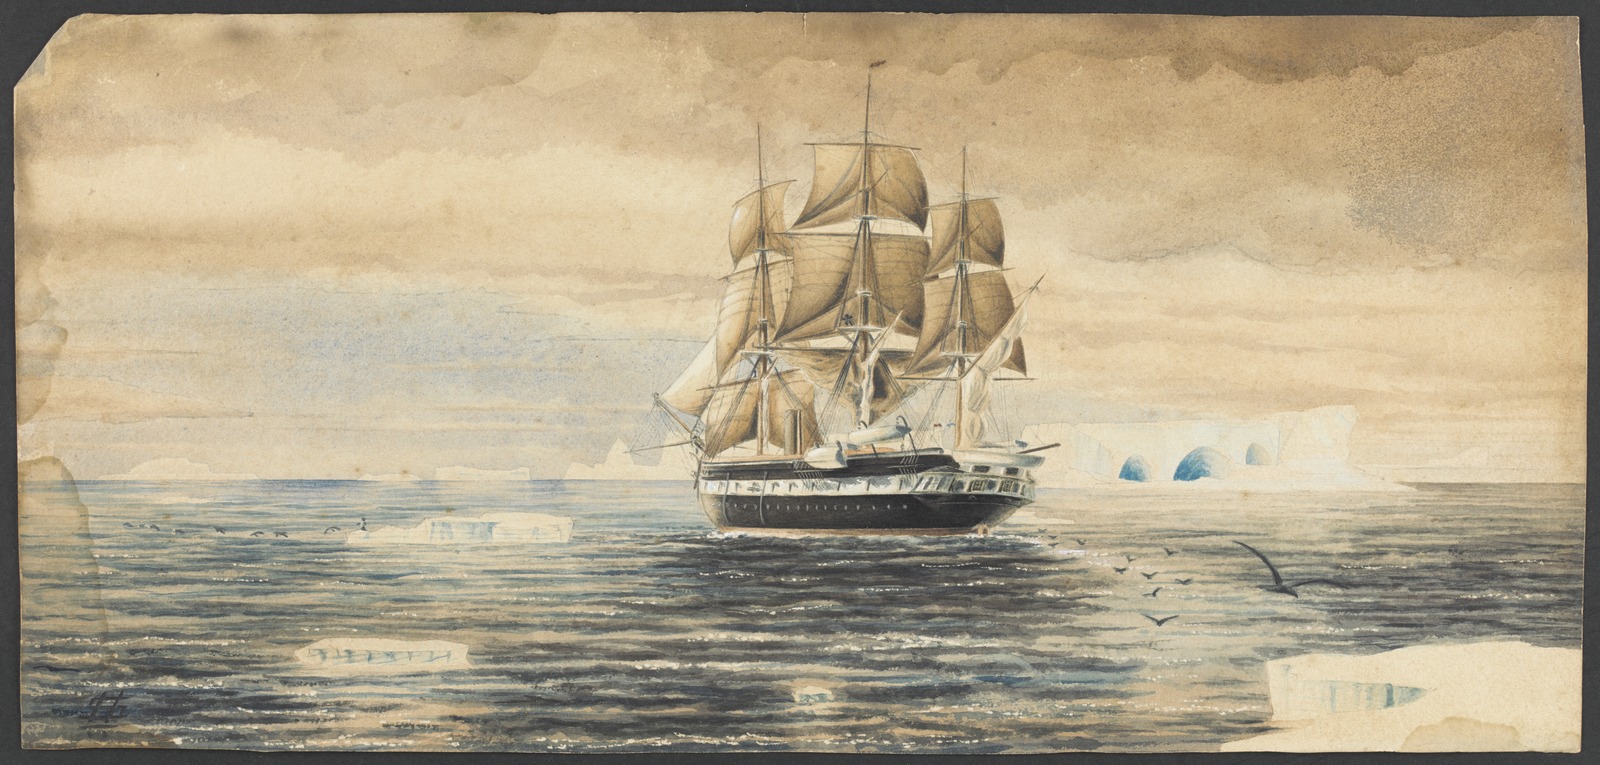 Painting of the HMS Challenger